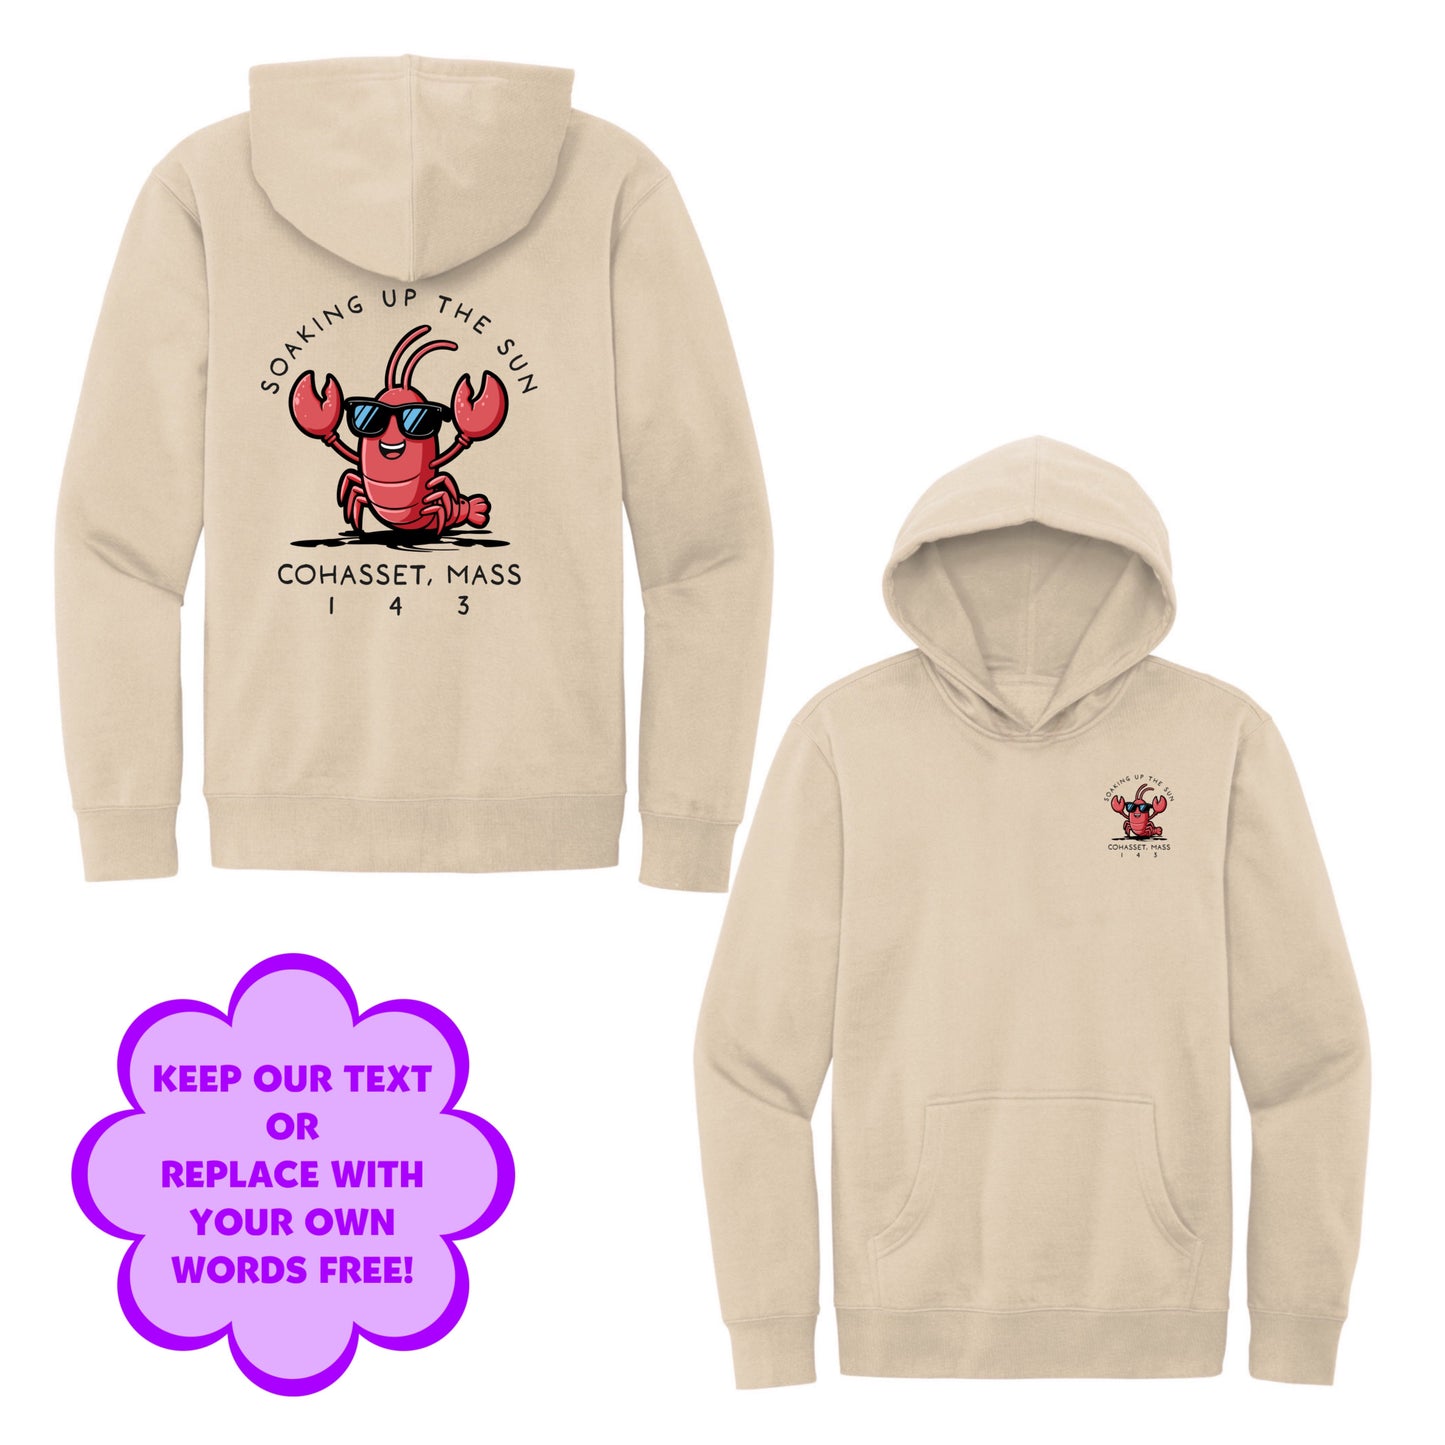 Personalize Free Beach Lobster, Cohasset, Adult Fleece Hoodies from Baby Squid Ink 